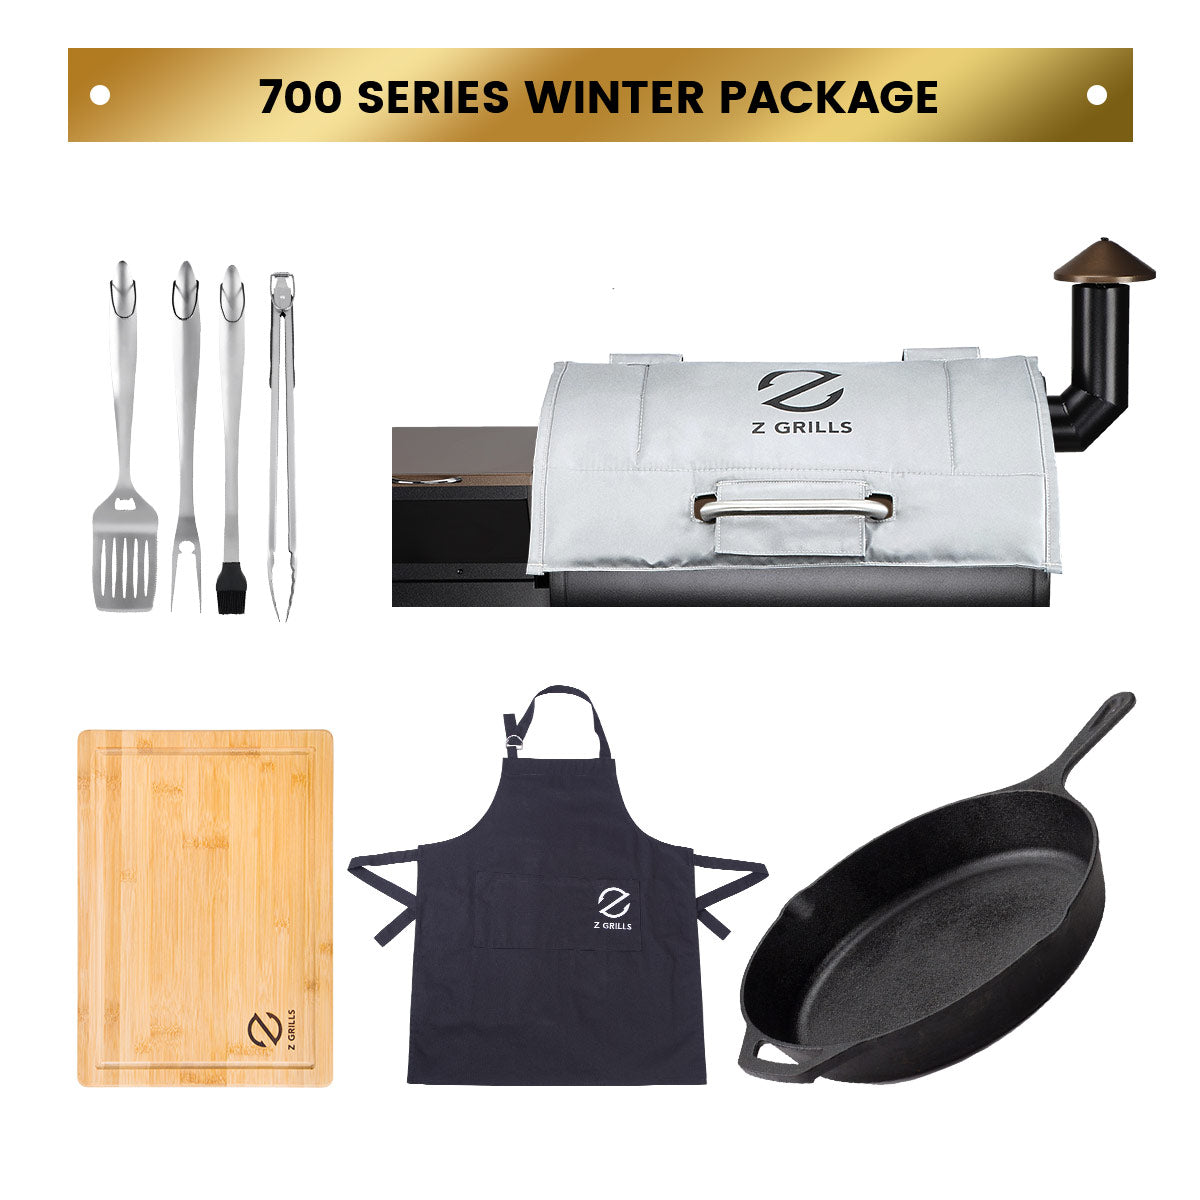 WINTER GRILLING PACKAGE